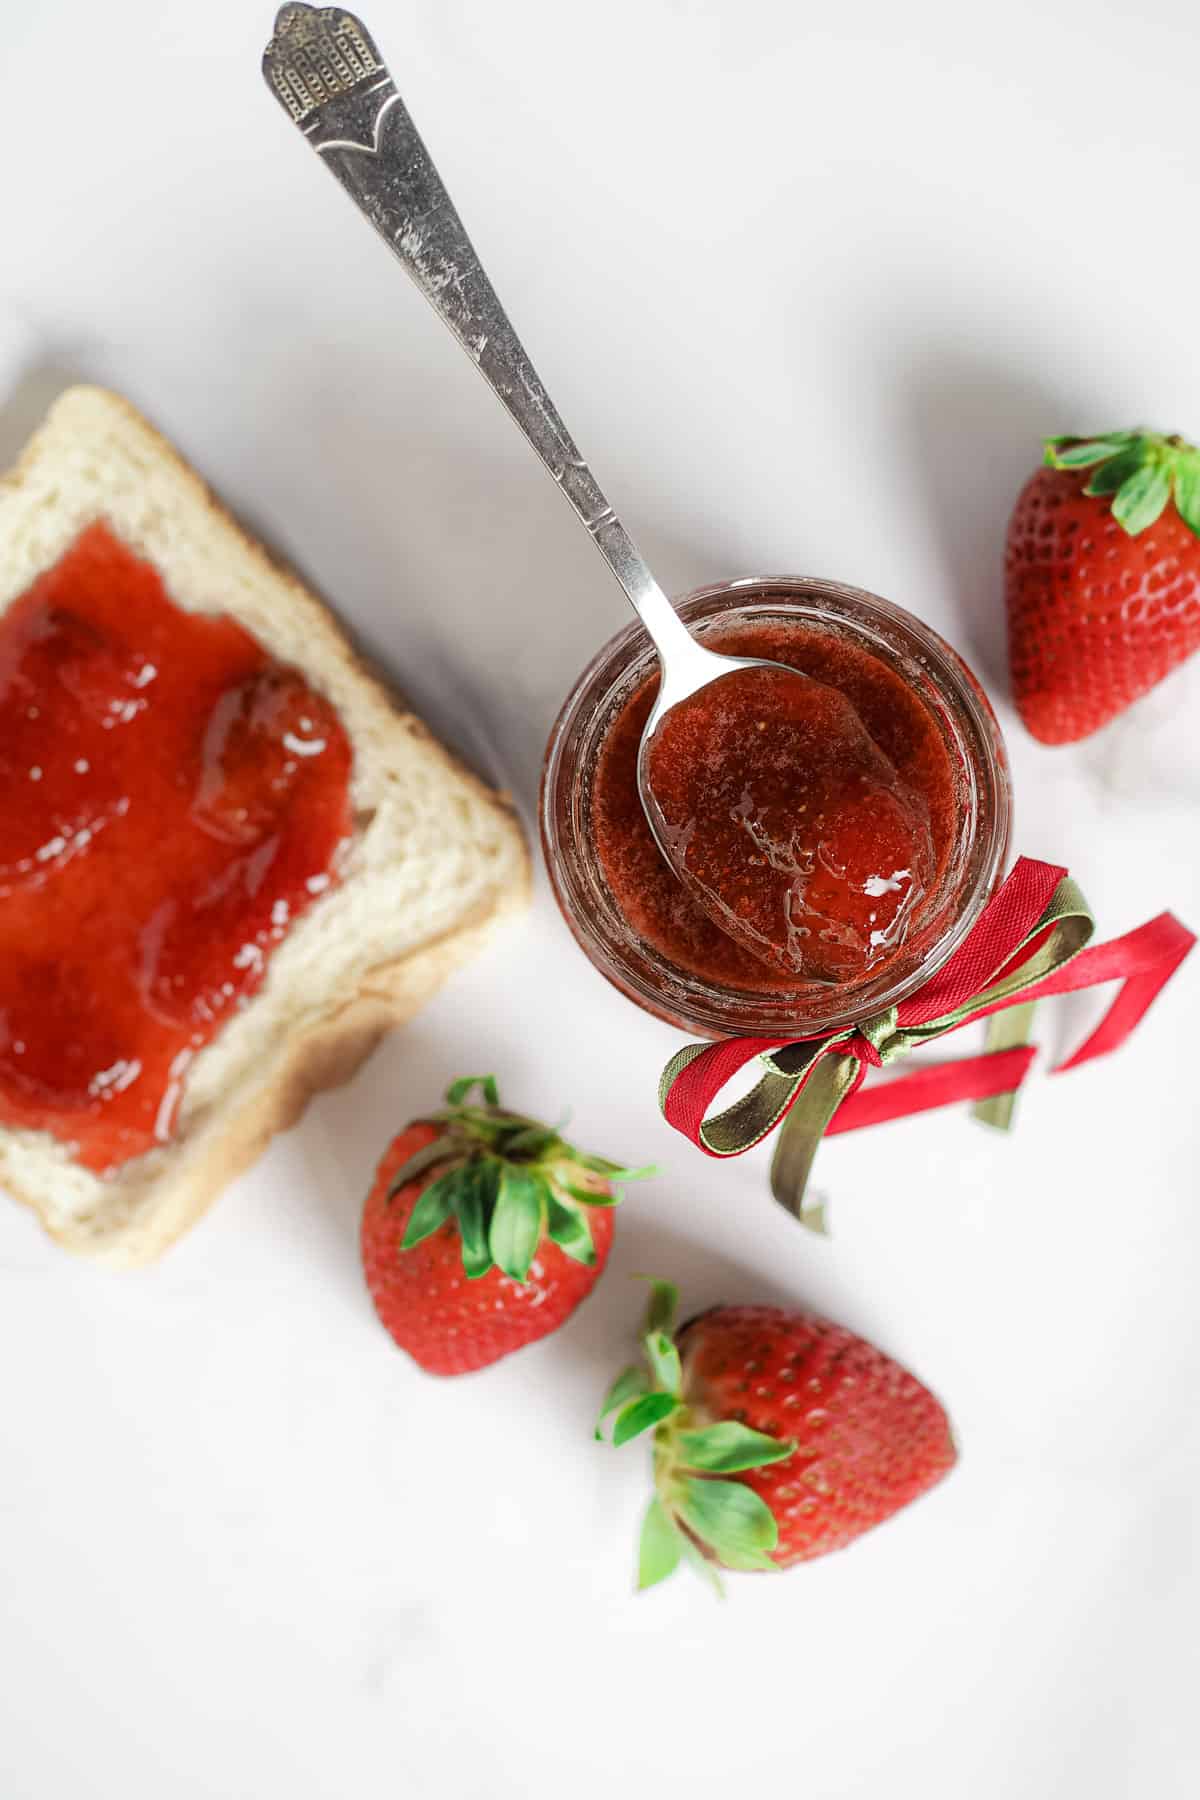 A bottle of strawberry jam with a slice of toast (with jam on) on the side.